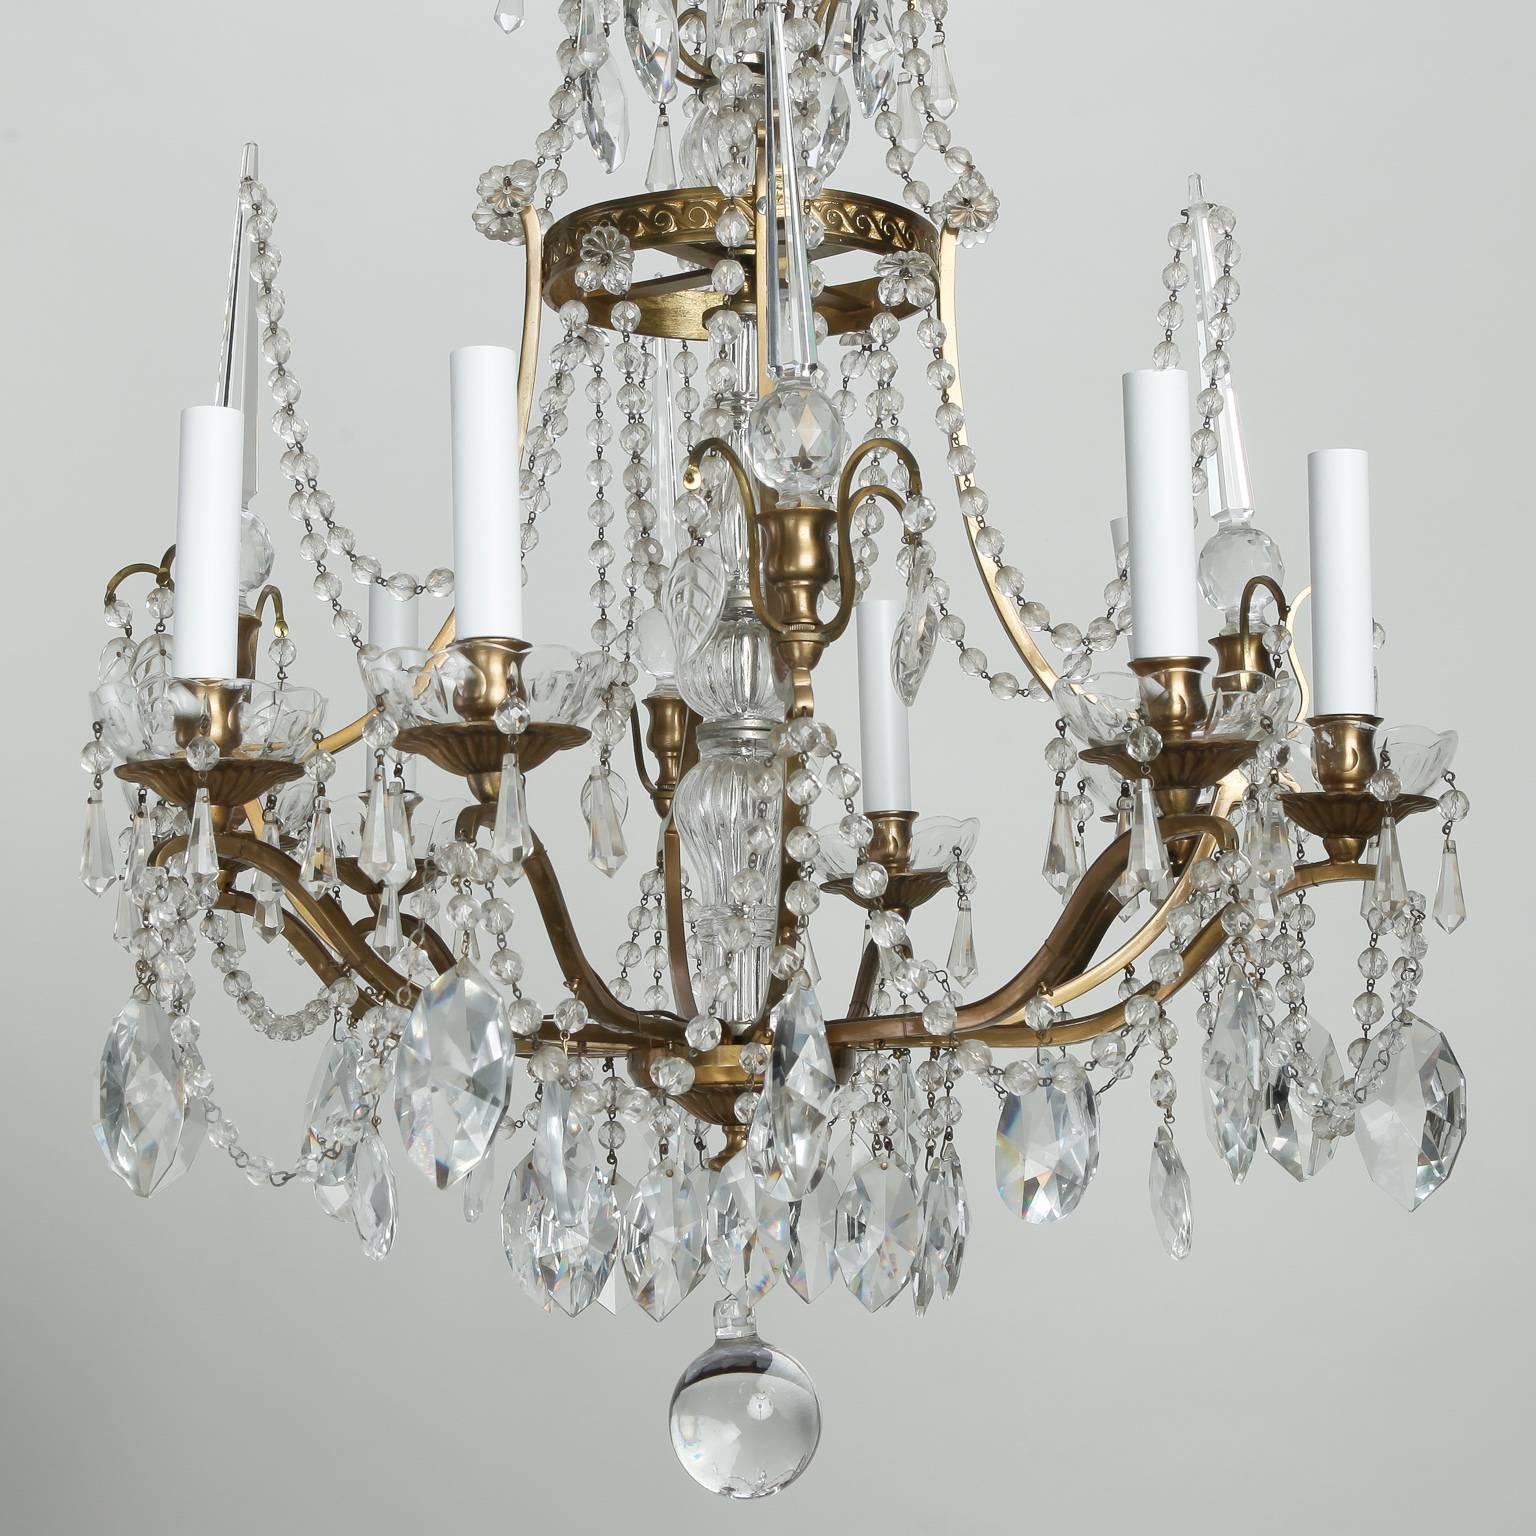 Mid-20th Century Italian Eight-Arm Chandelier with Crystal Spears and Swagged Beads